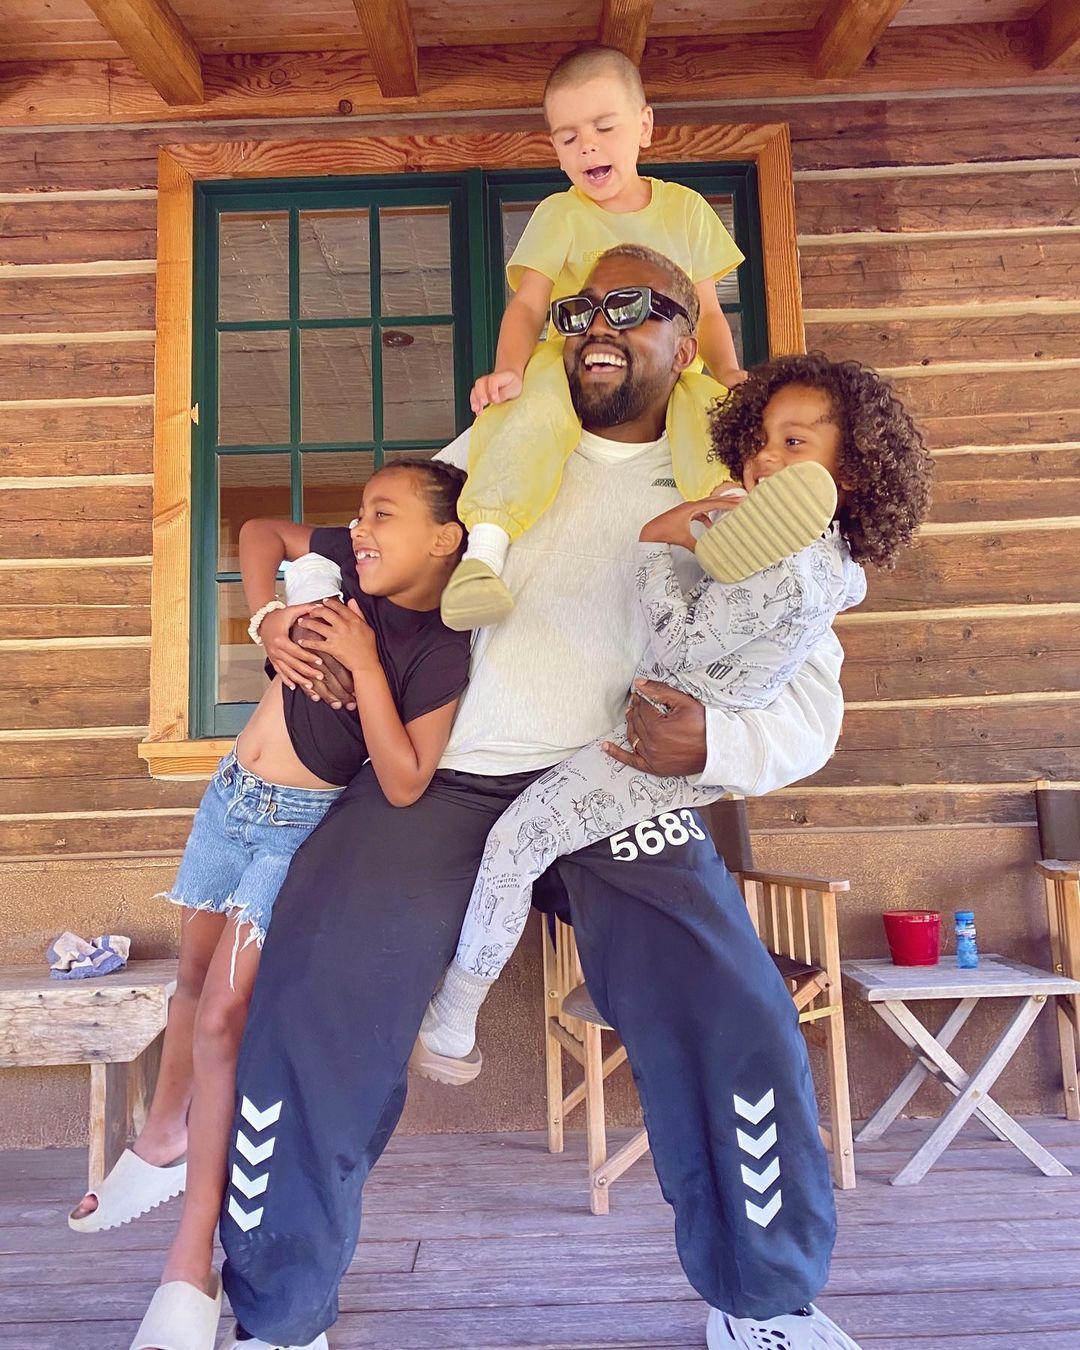 A photo showing Kanye West goofing around with his kids.